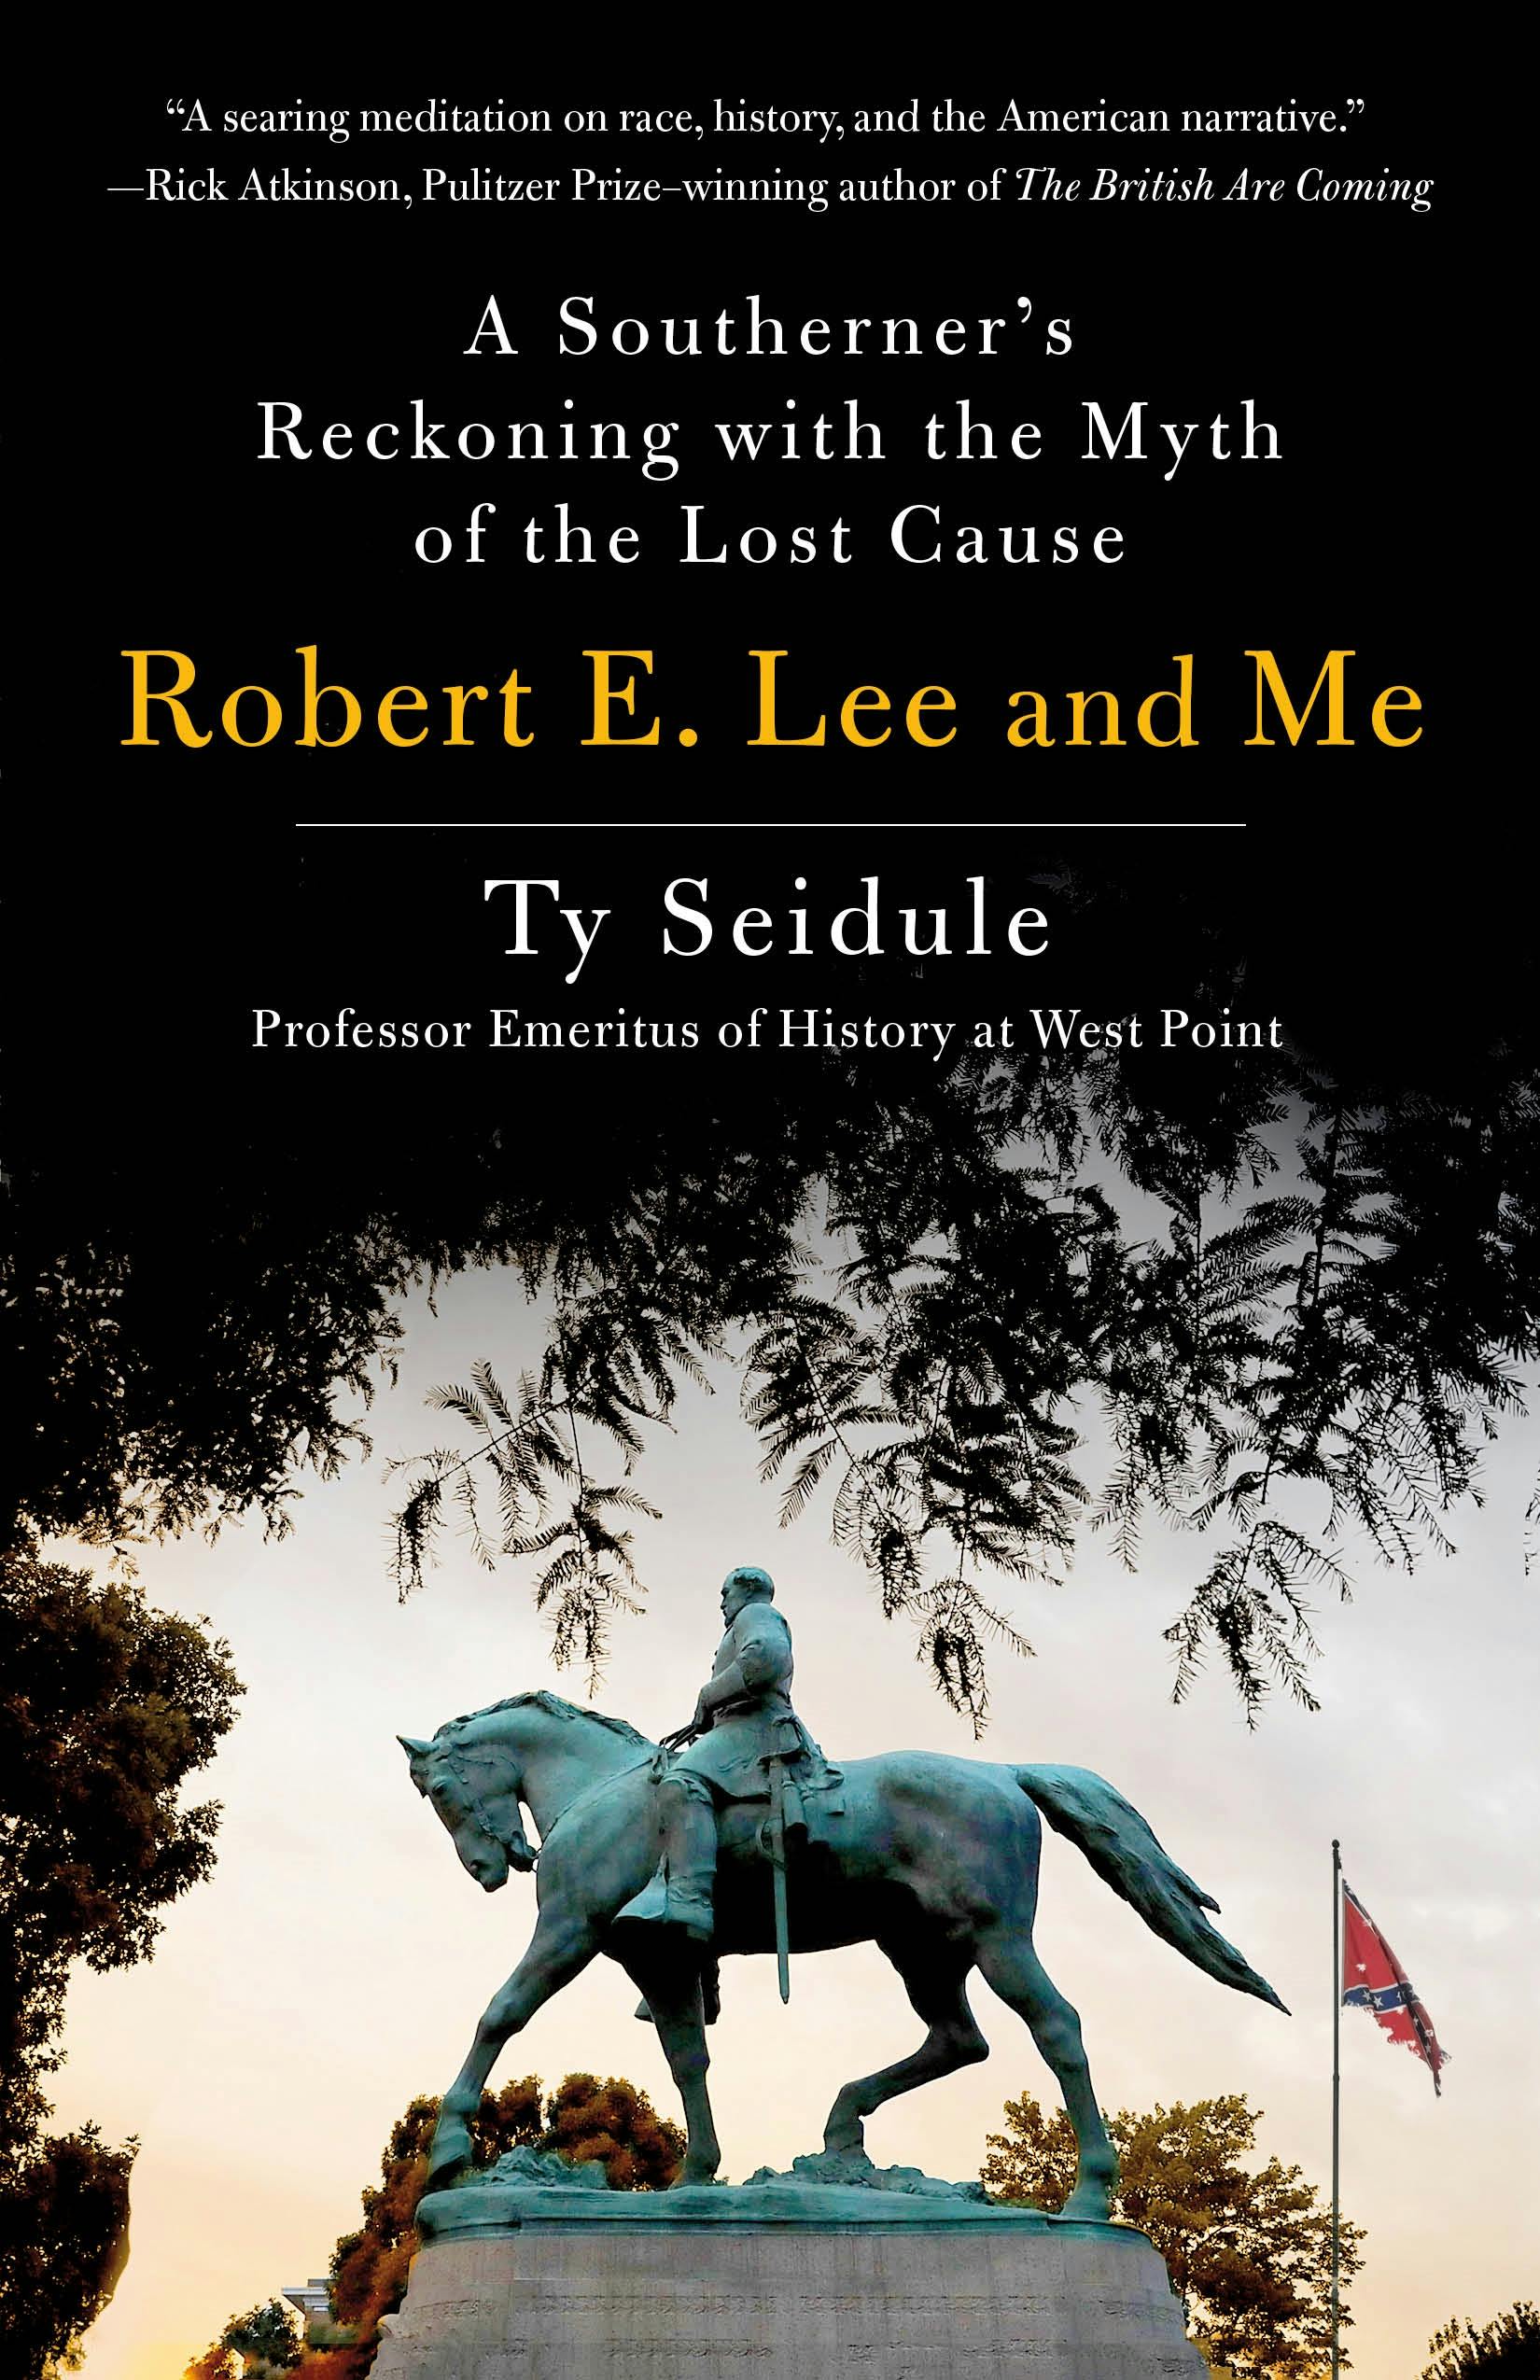 robert e lee and me by ty seidule